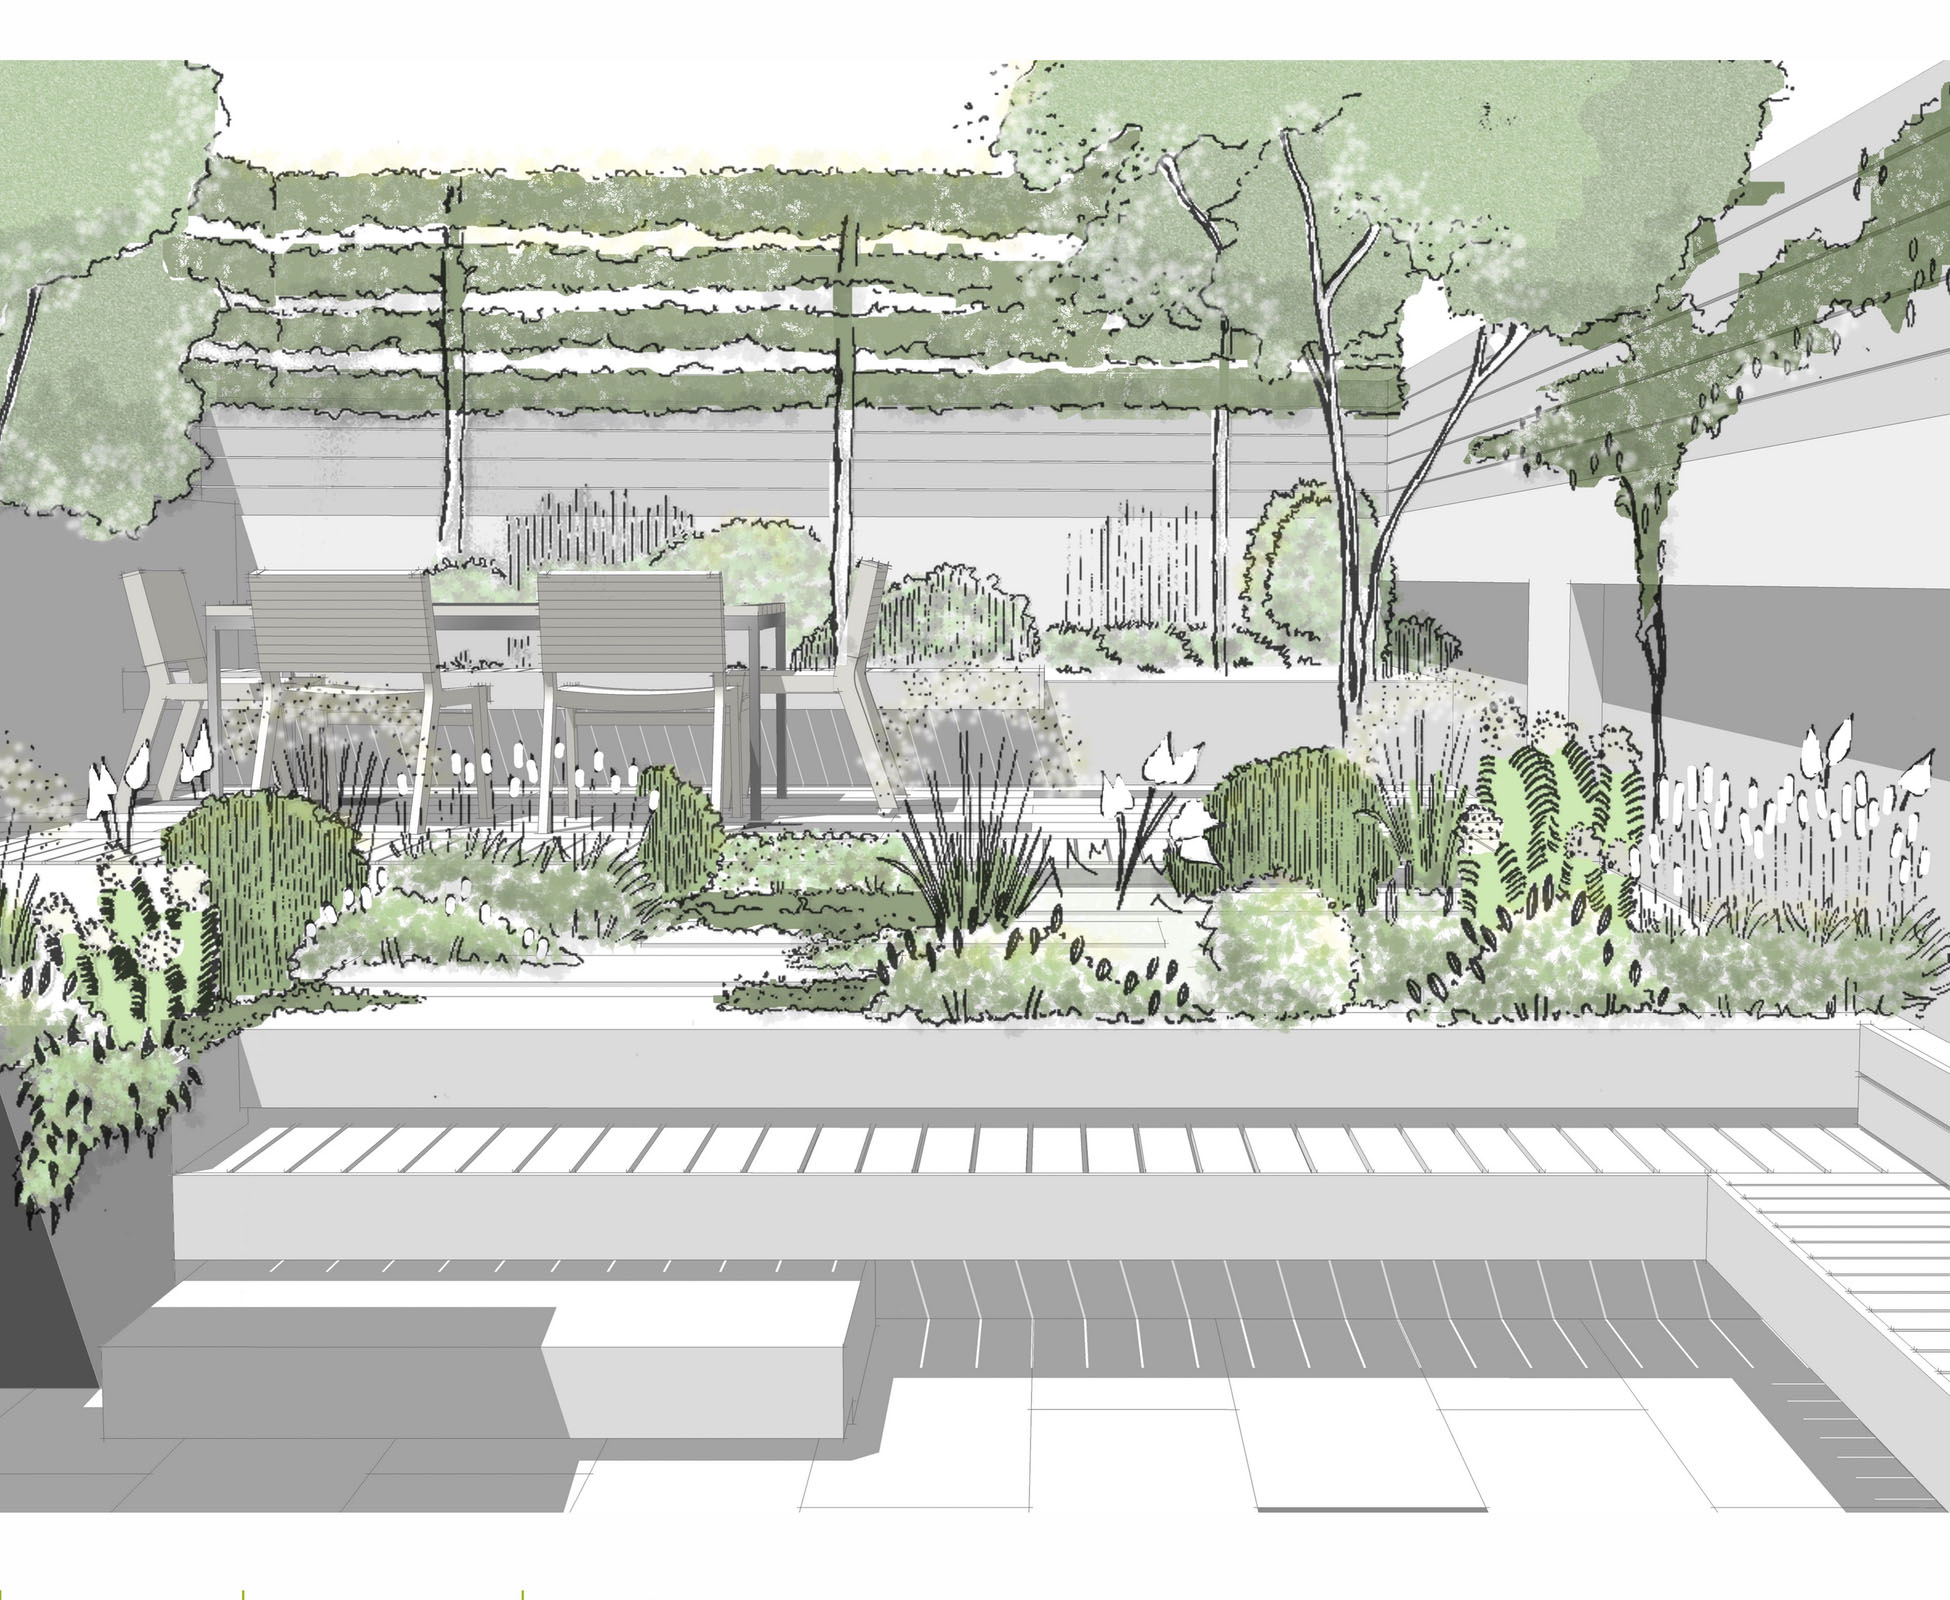 The hand drawn 3D visual explains the initial concept and design by London Garden Designer to the clients of this Crouch End garden.